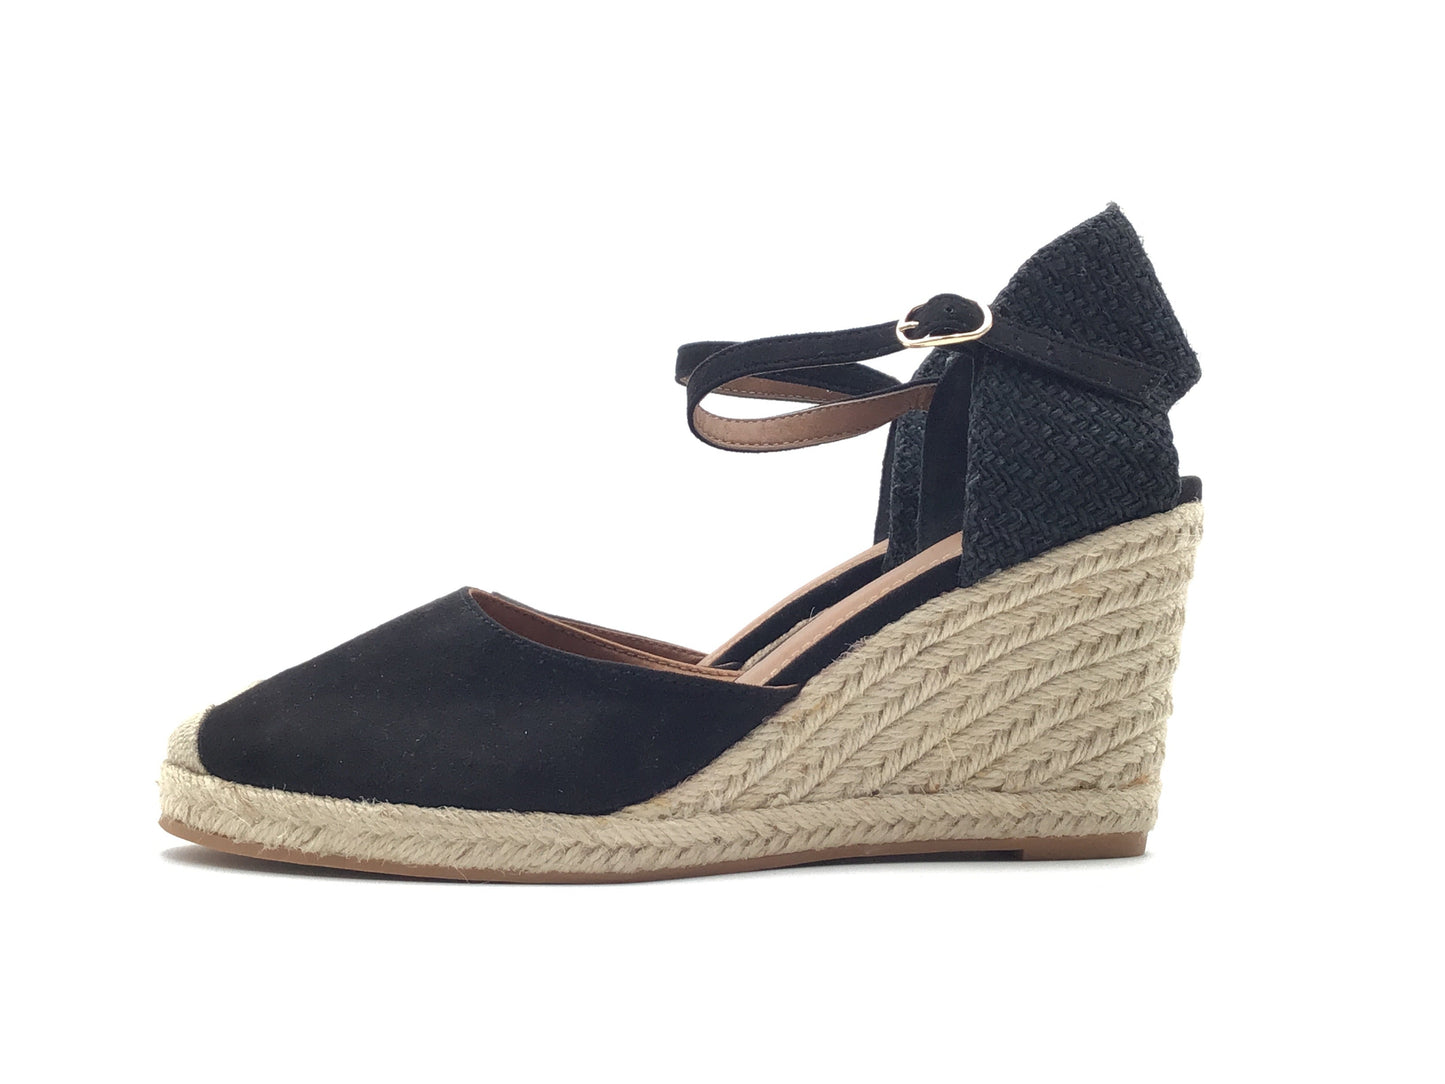 Shoes Heels Espadrille Wedge By H&m  Size: 8.5